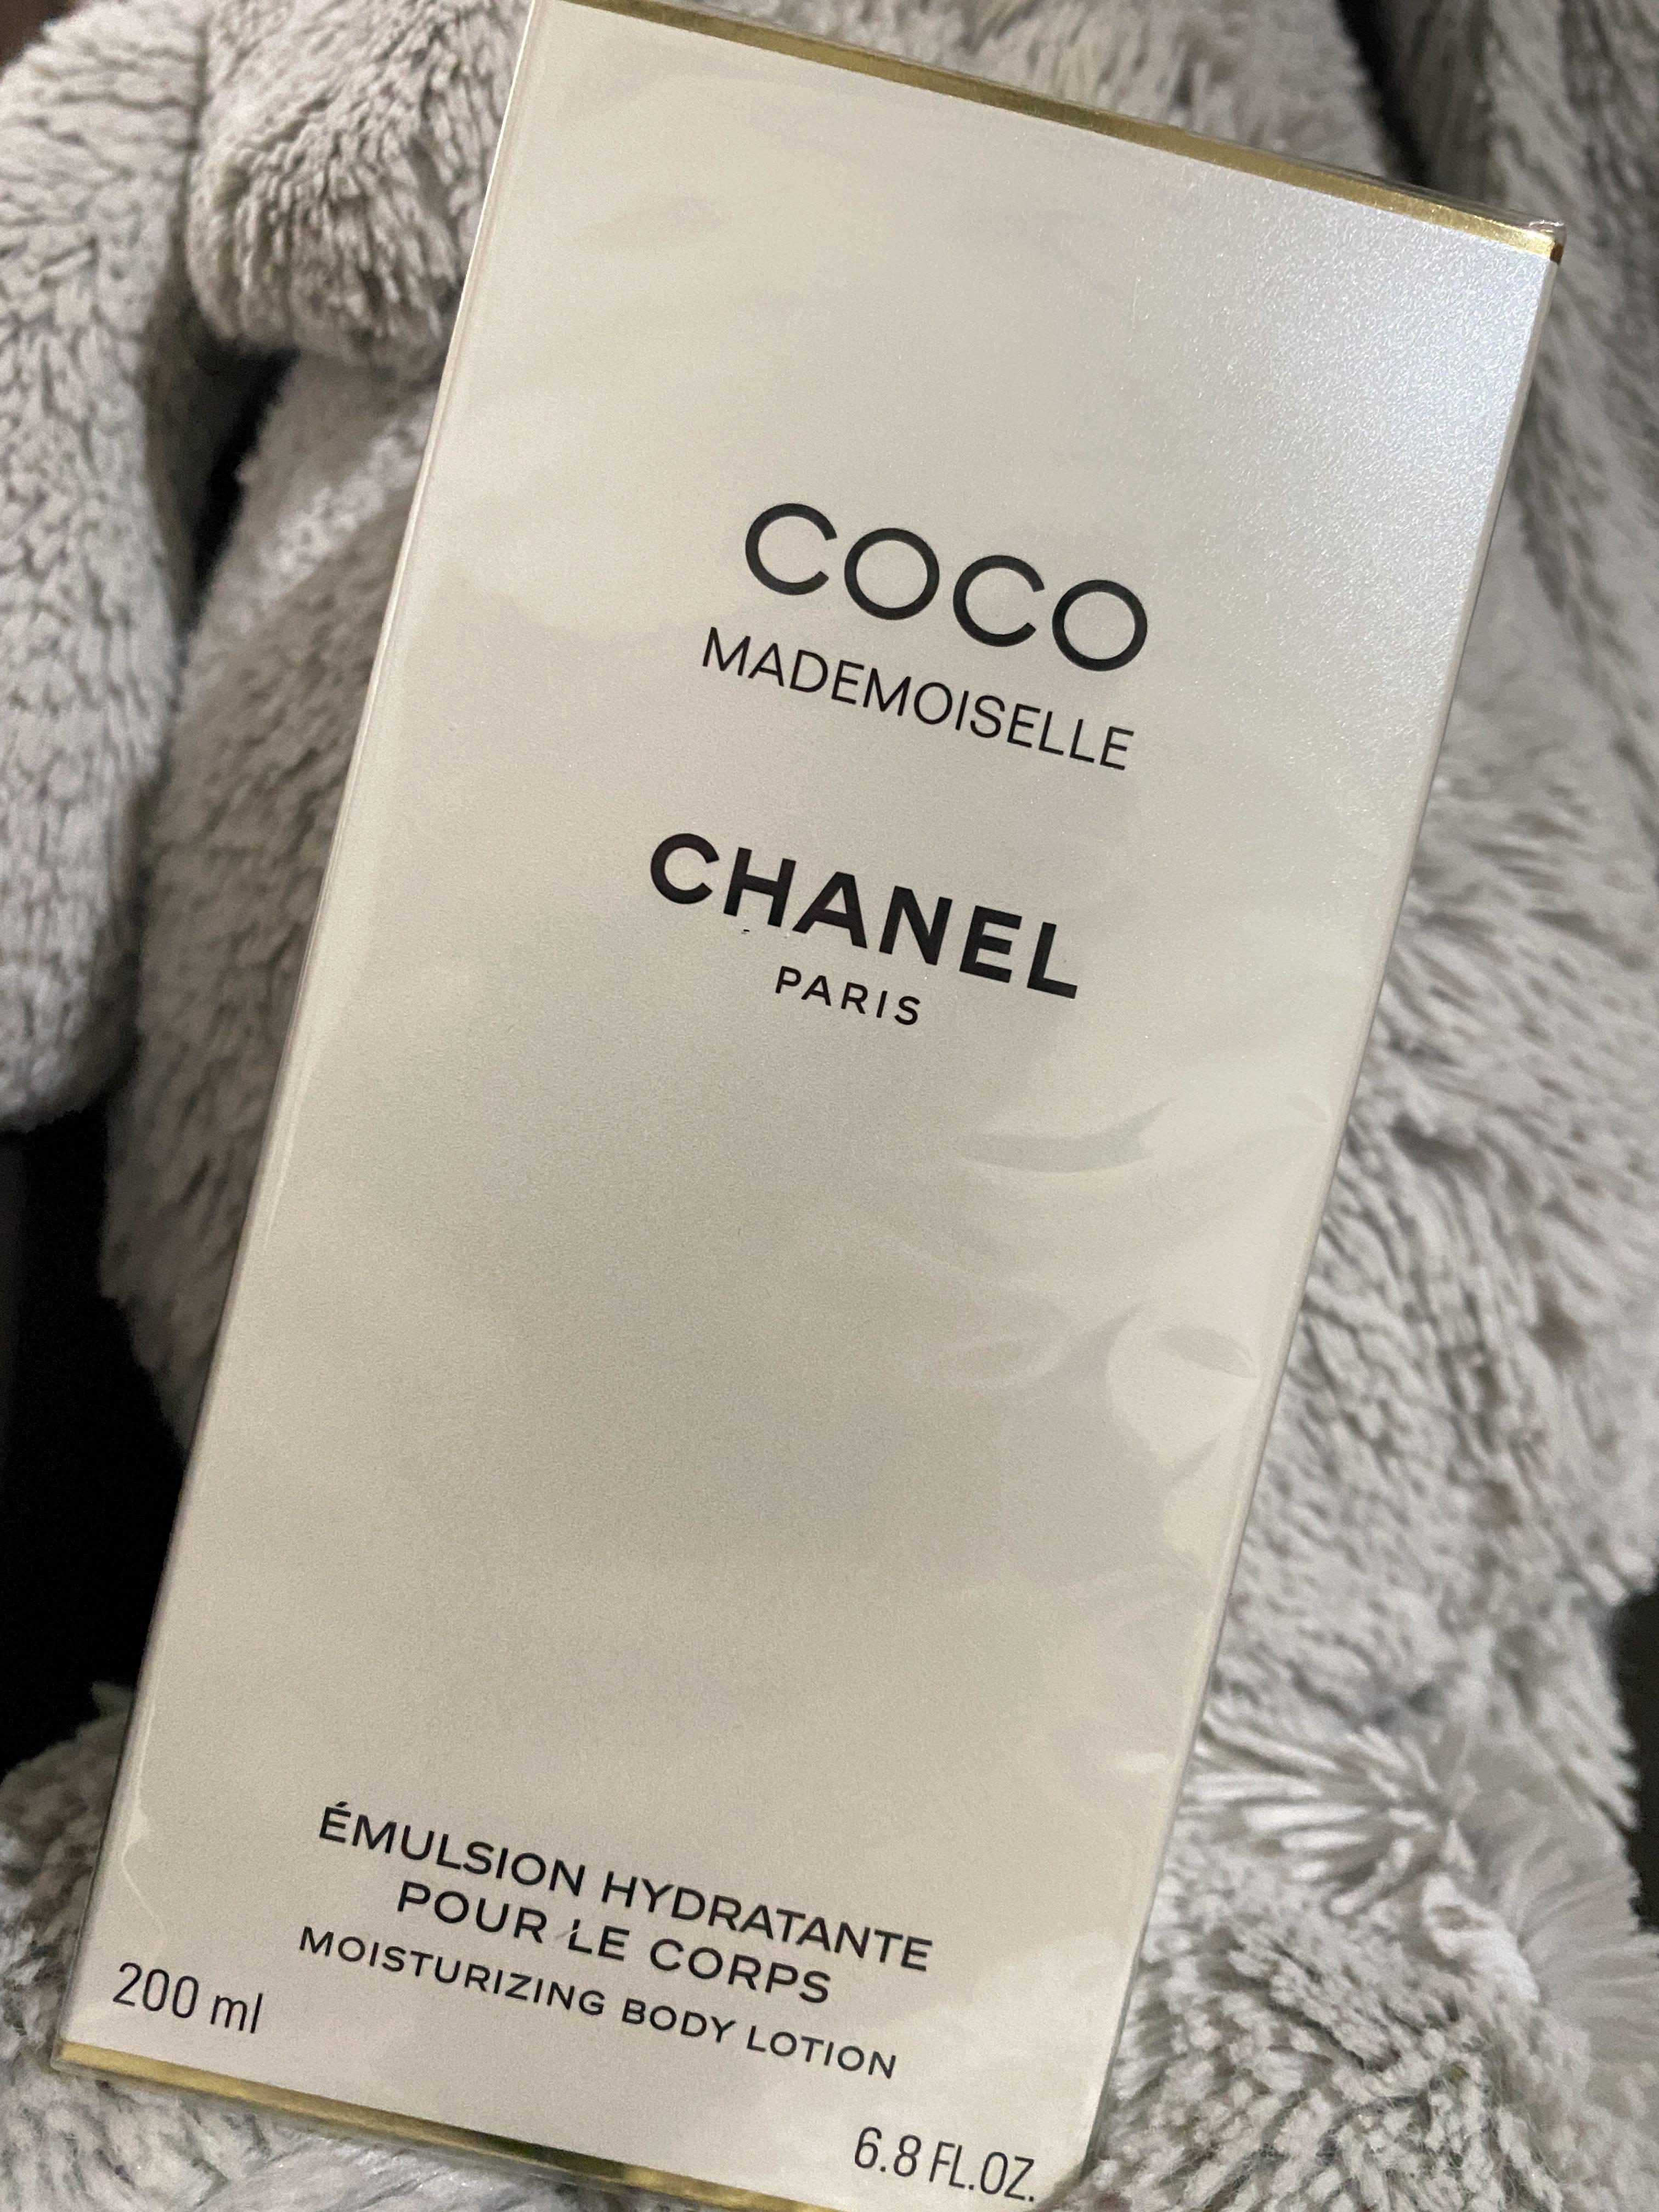 Chanel Coco Mademoiselle 6.8 oz / 200 ml Body Lotion New And Boxed